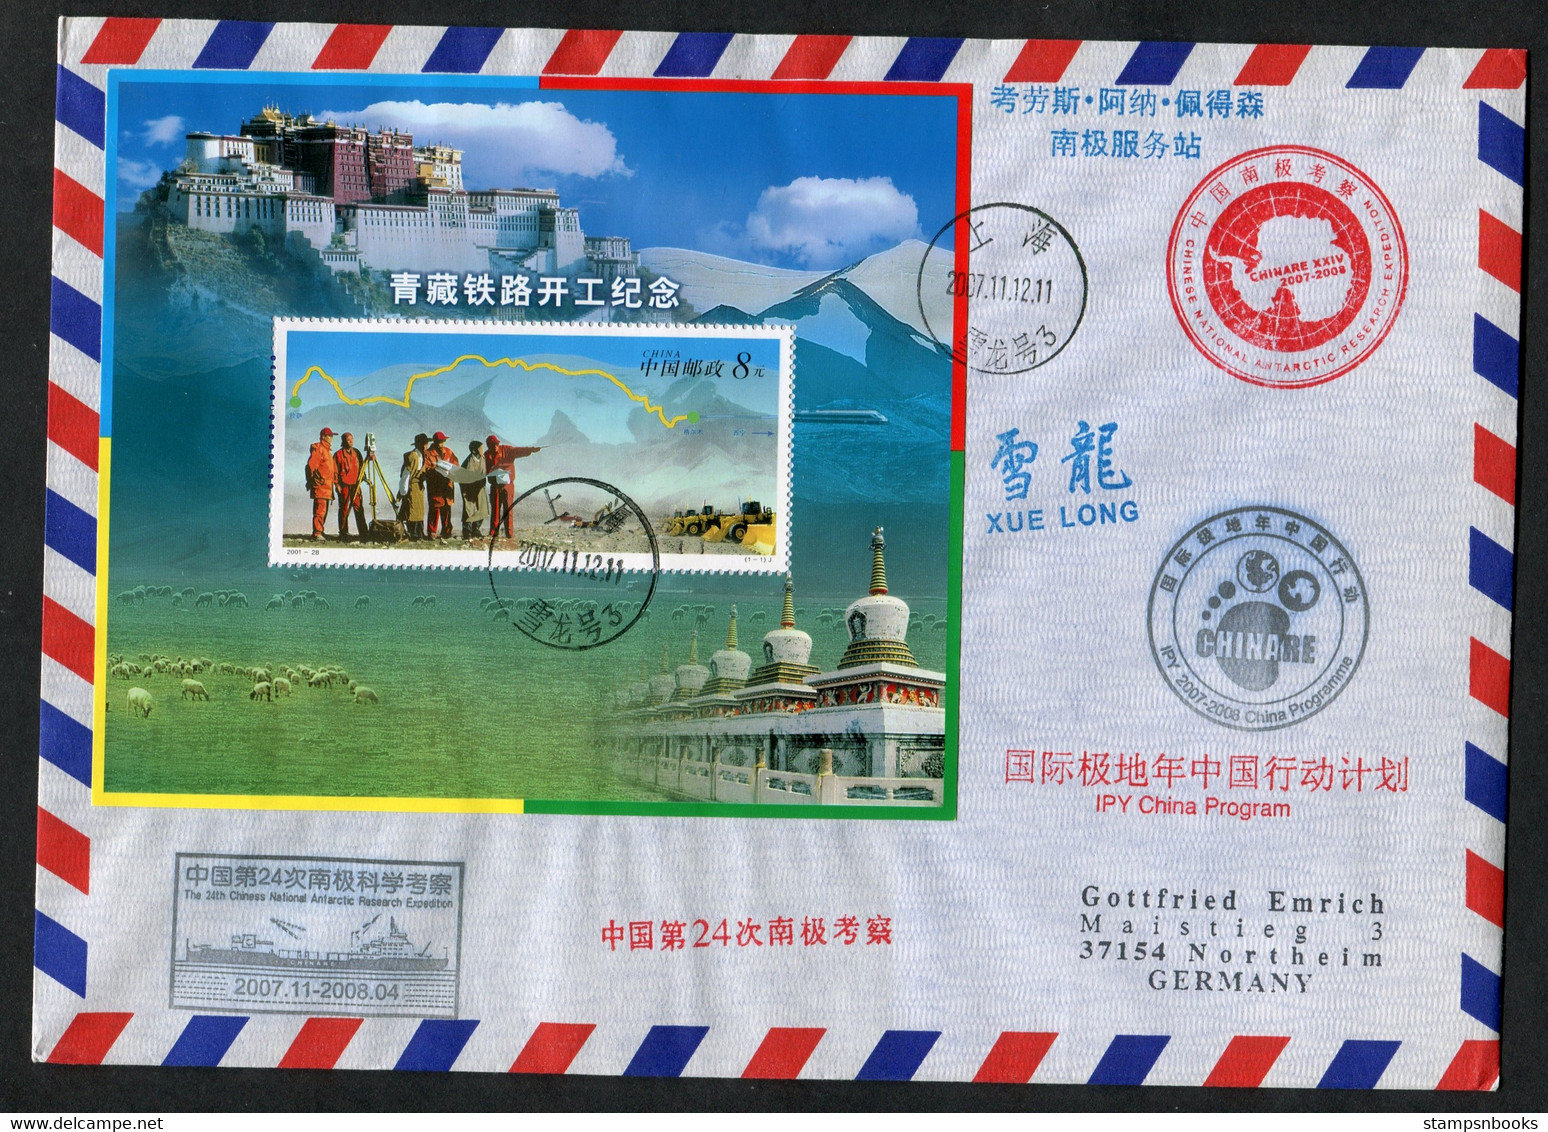 2007-8 China Antarctica 24th CHINARE Antarctic Research Expedition Cover. IPY Xue Long, Tibet Railway Miniature Sheet - Covers & Documents